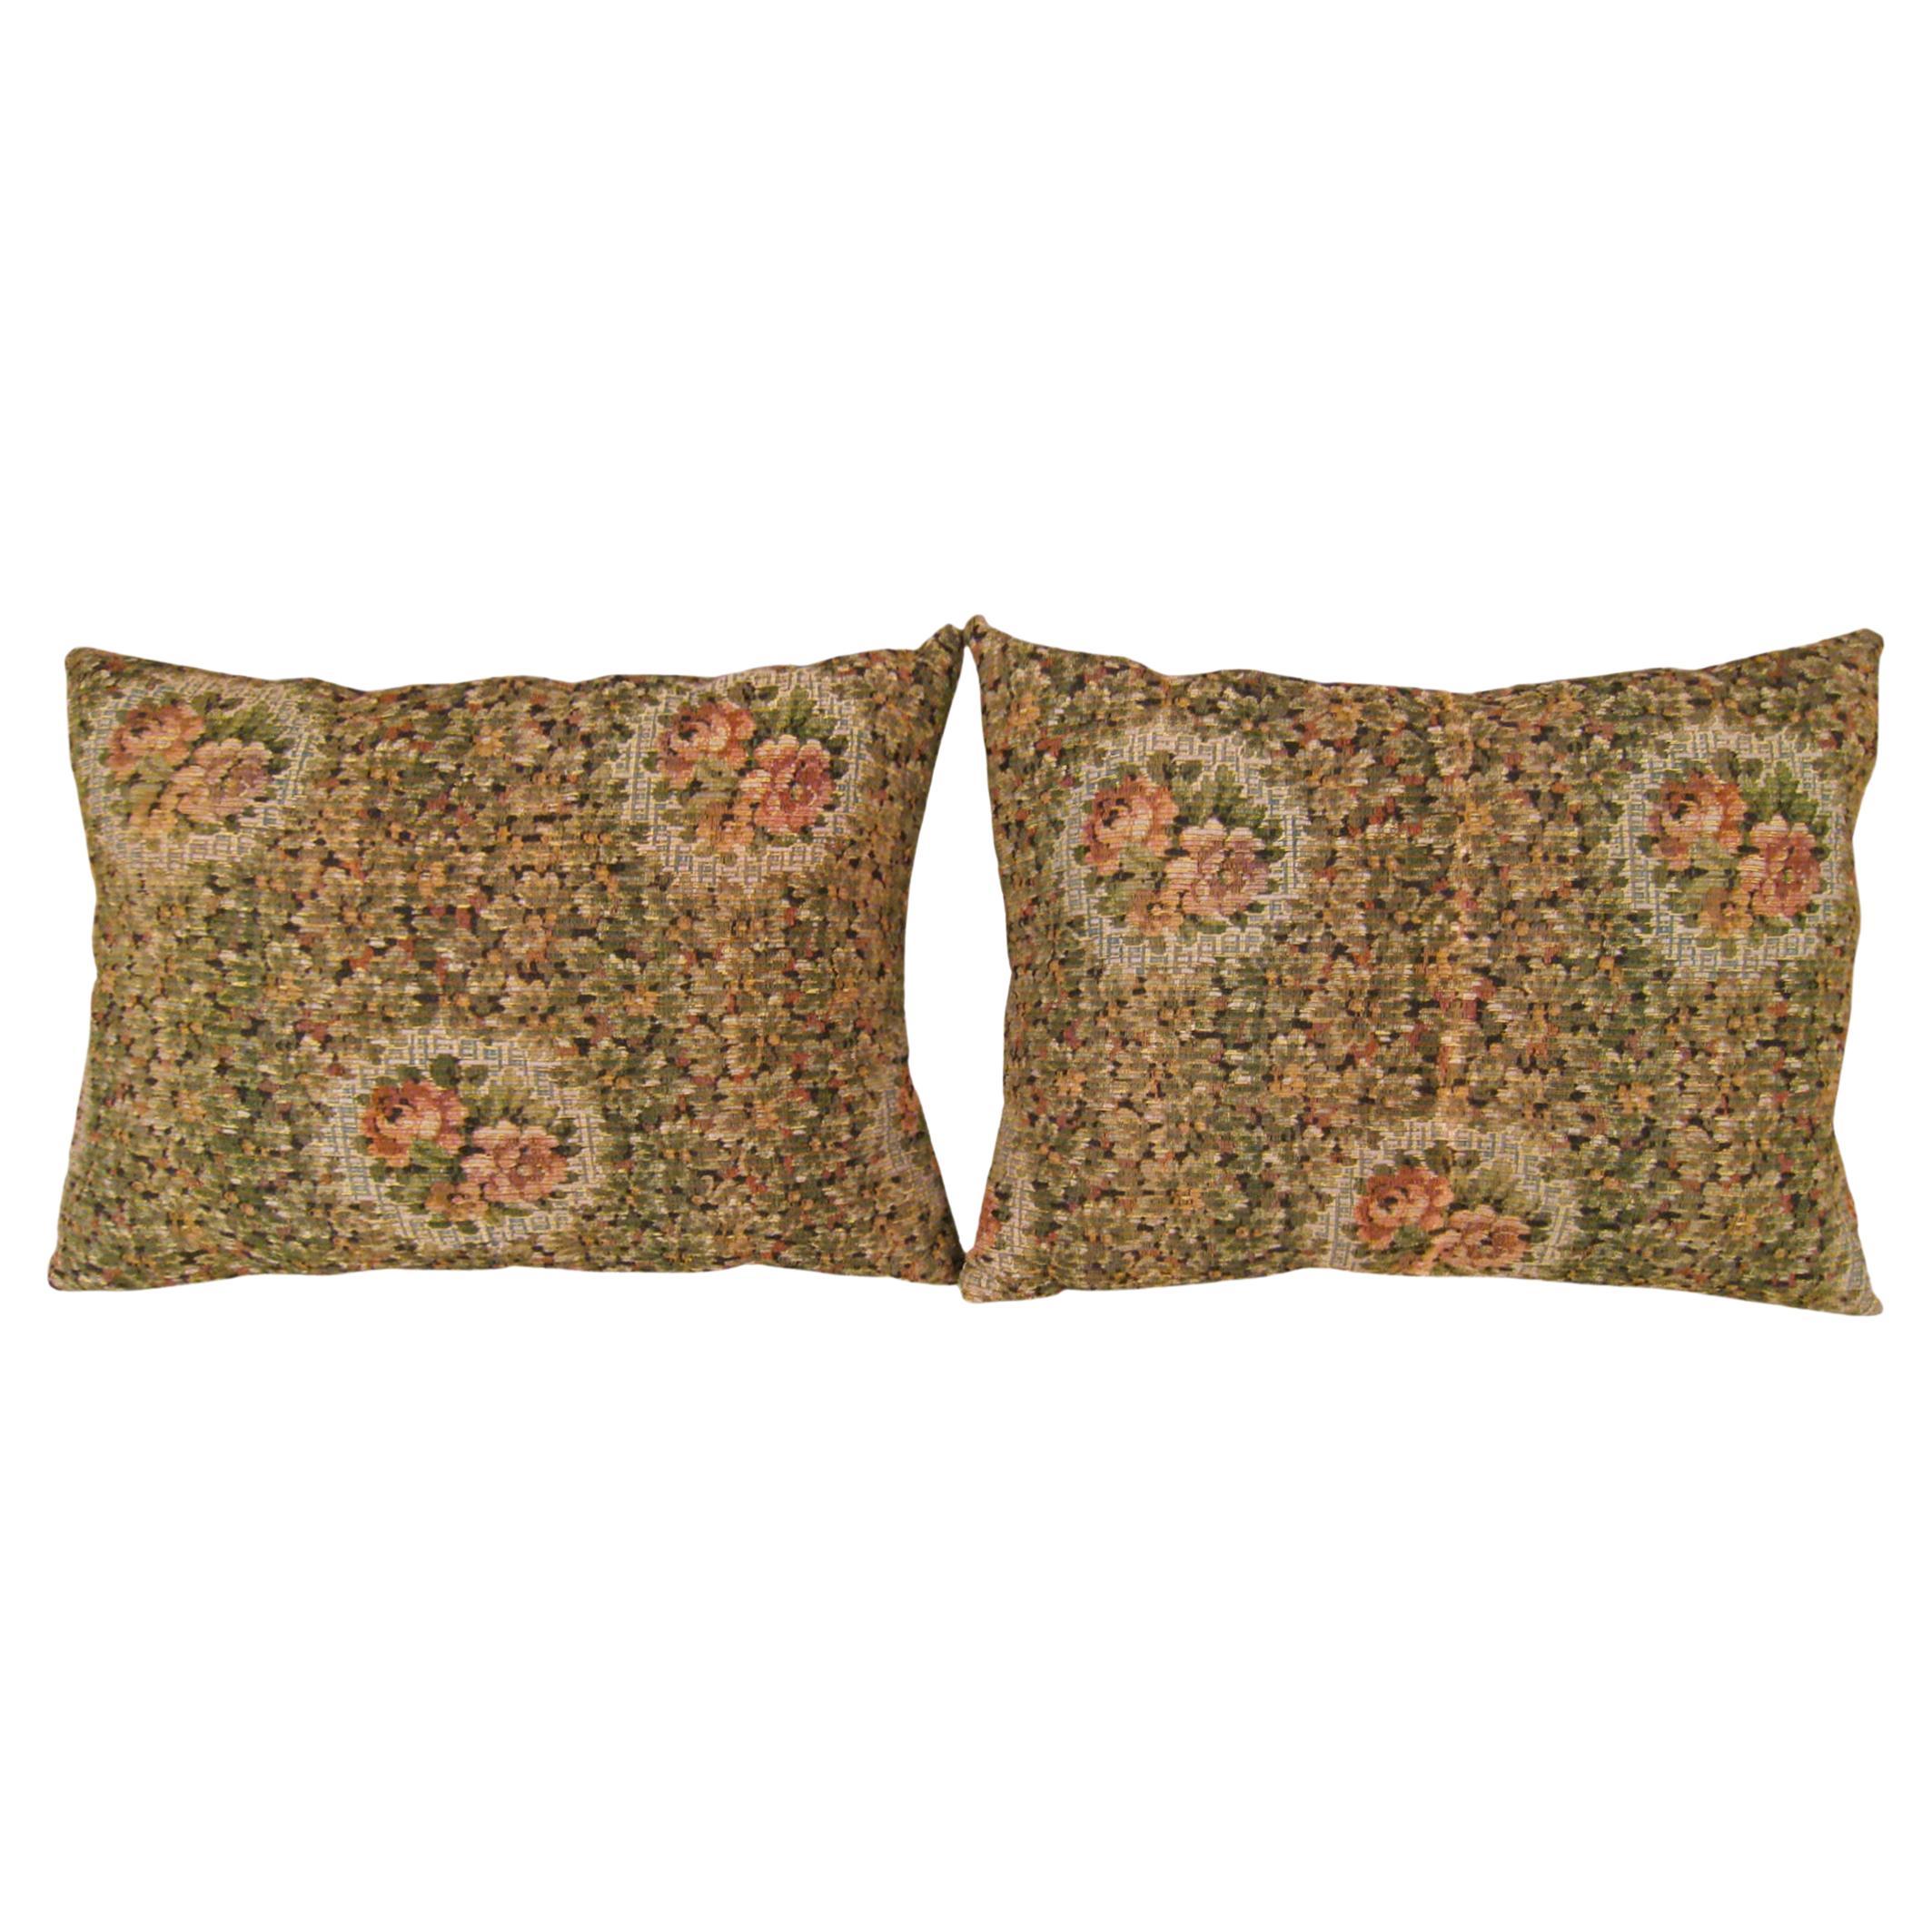 Pair of Decorative Antique Jacquard Tapestry Pillows with Floral Elments